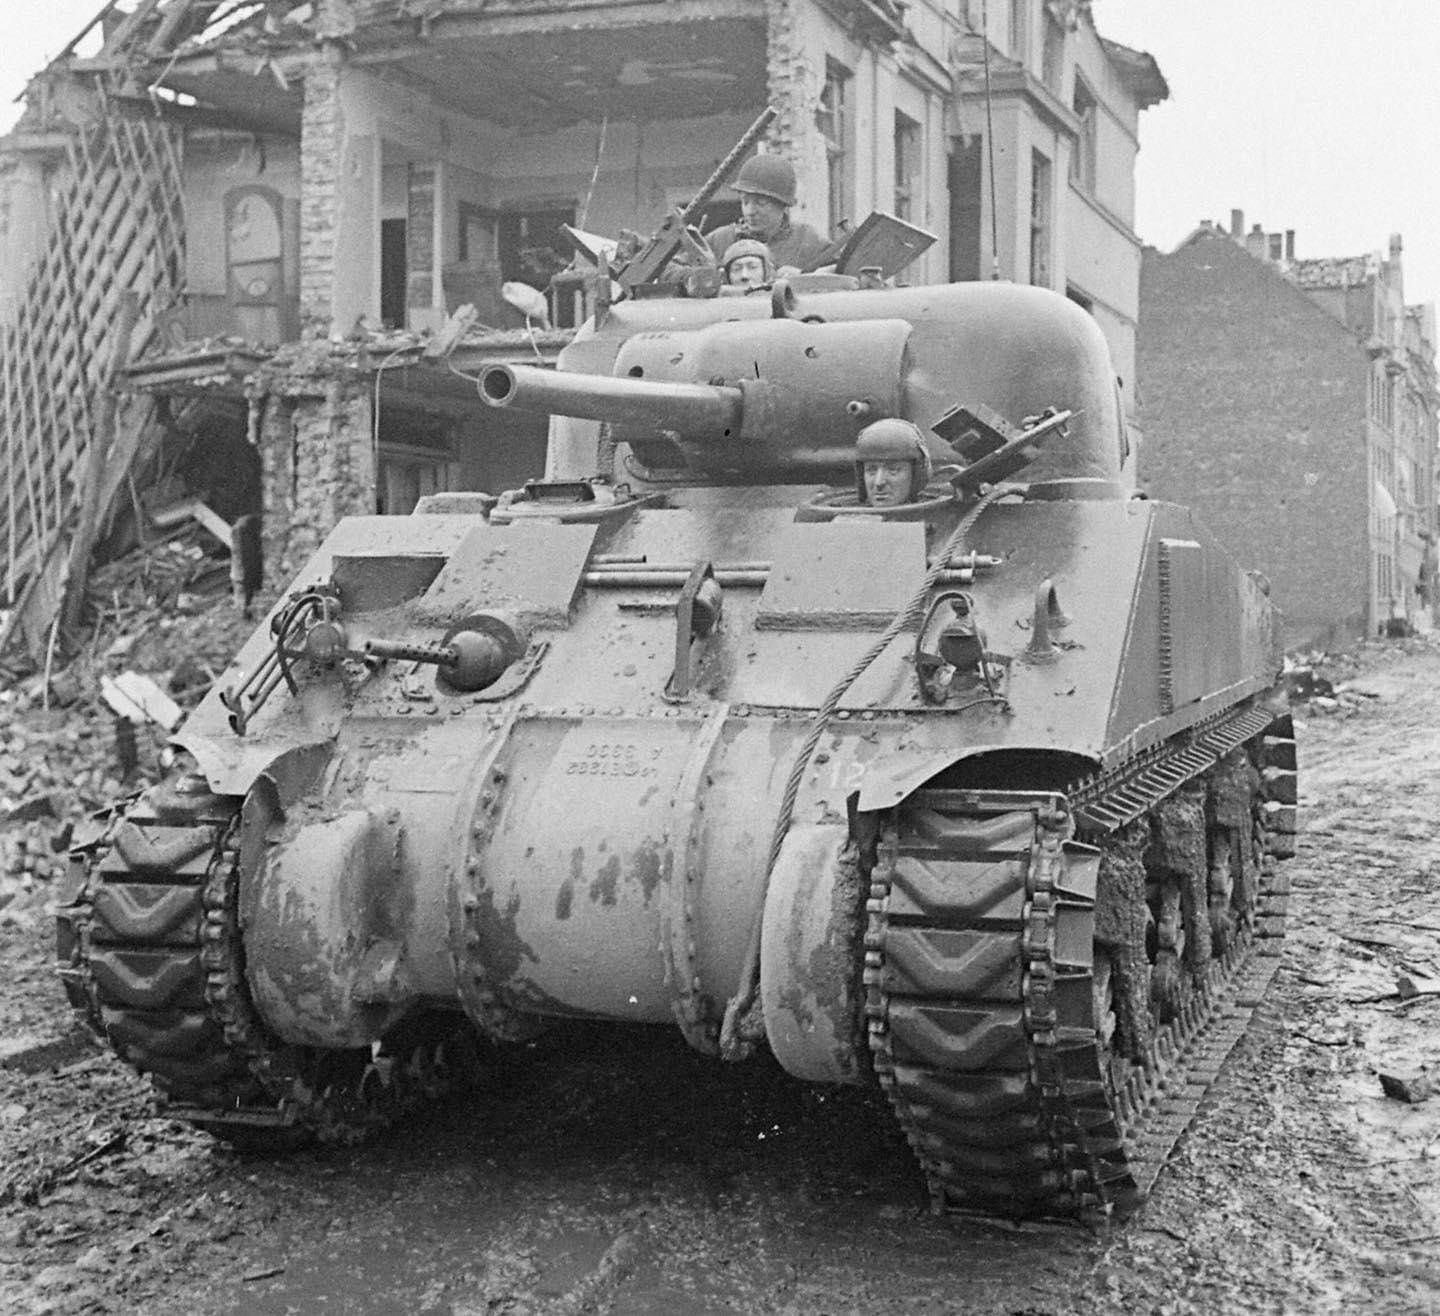 M4 Sherman with the US 32nd Armored Regiment, 3rd Armored Division in Eschweiler, North Rhine-Westphalia, Germany - December, 1944